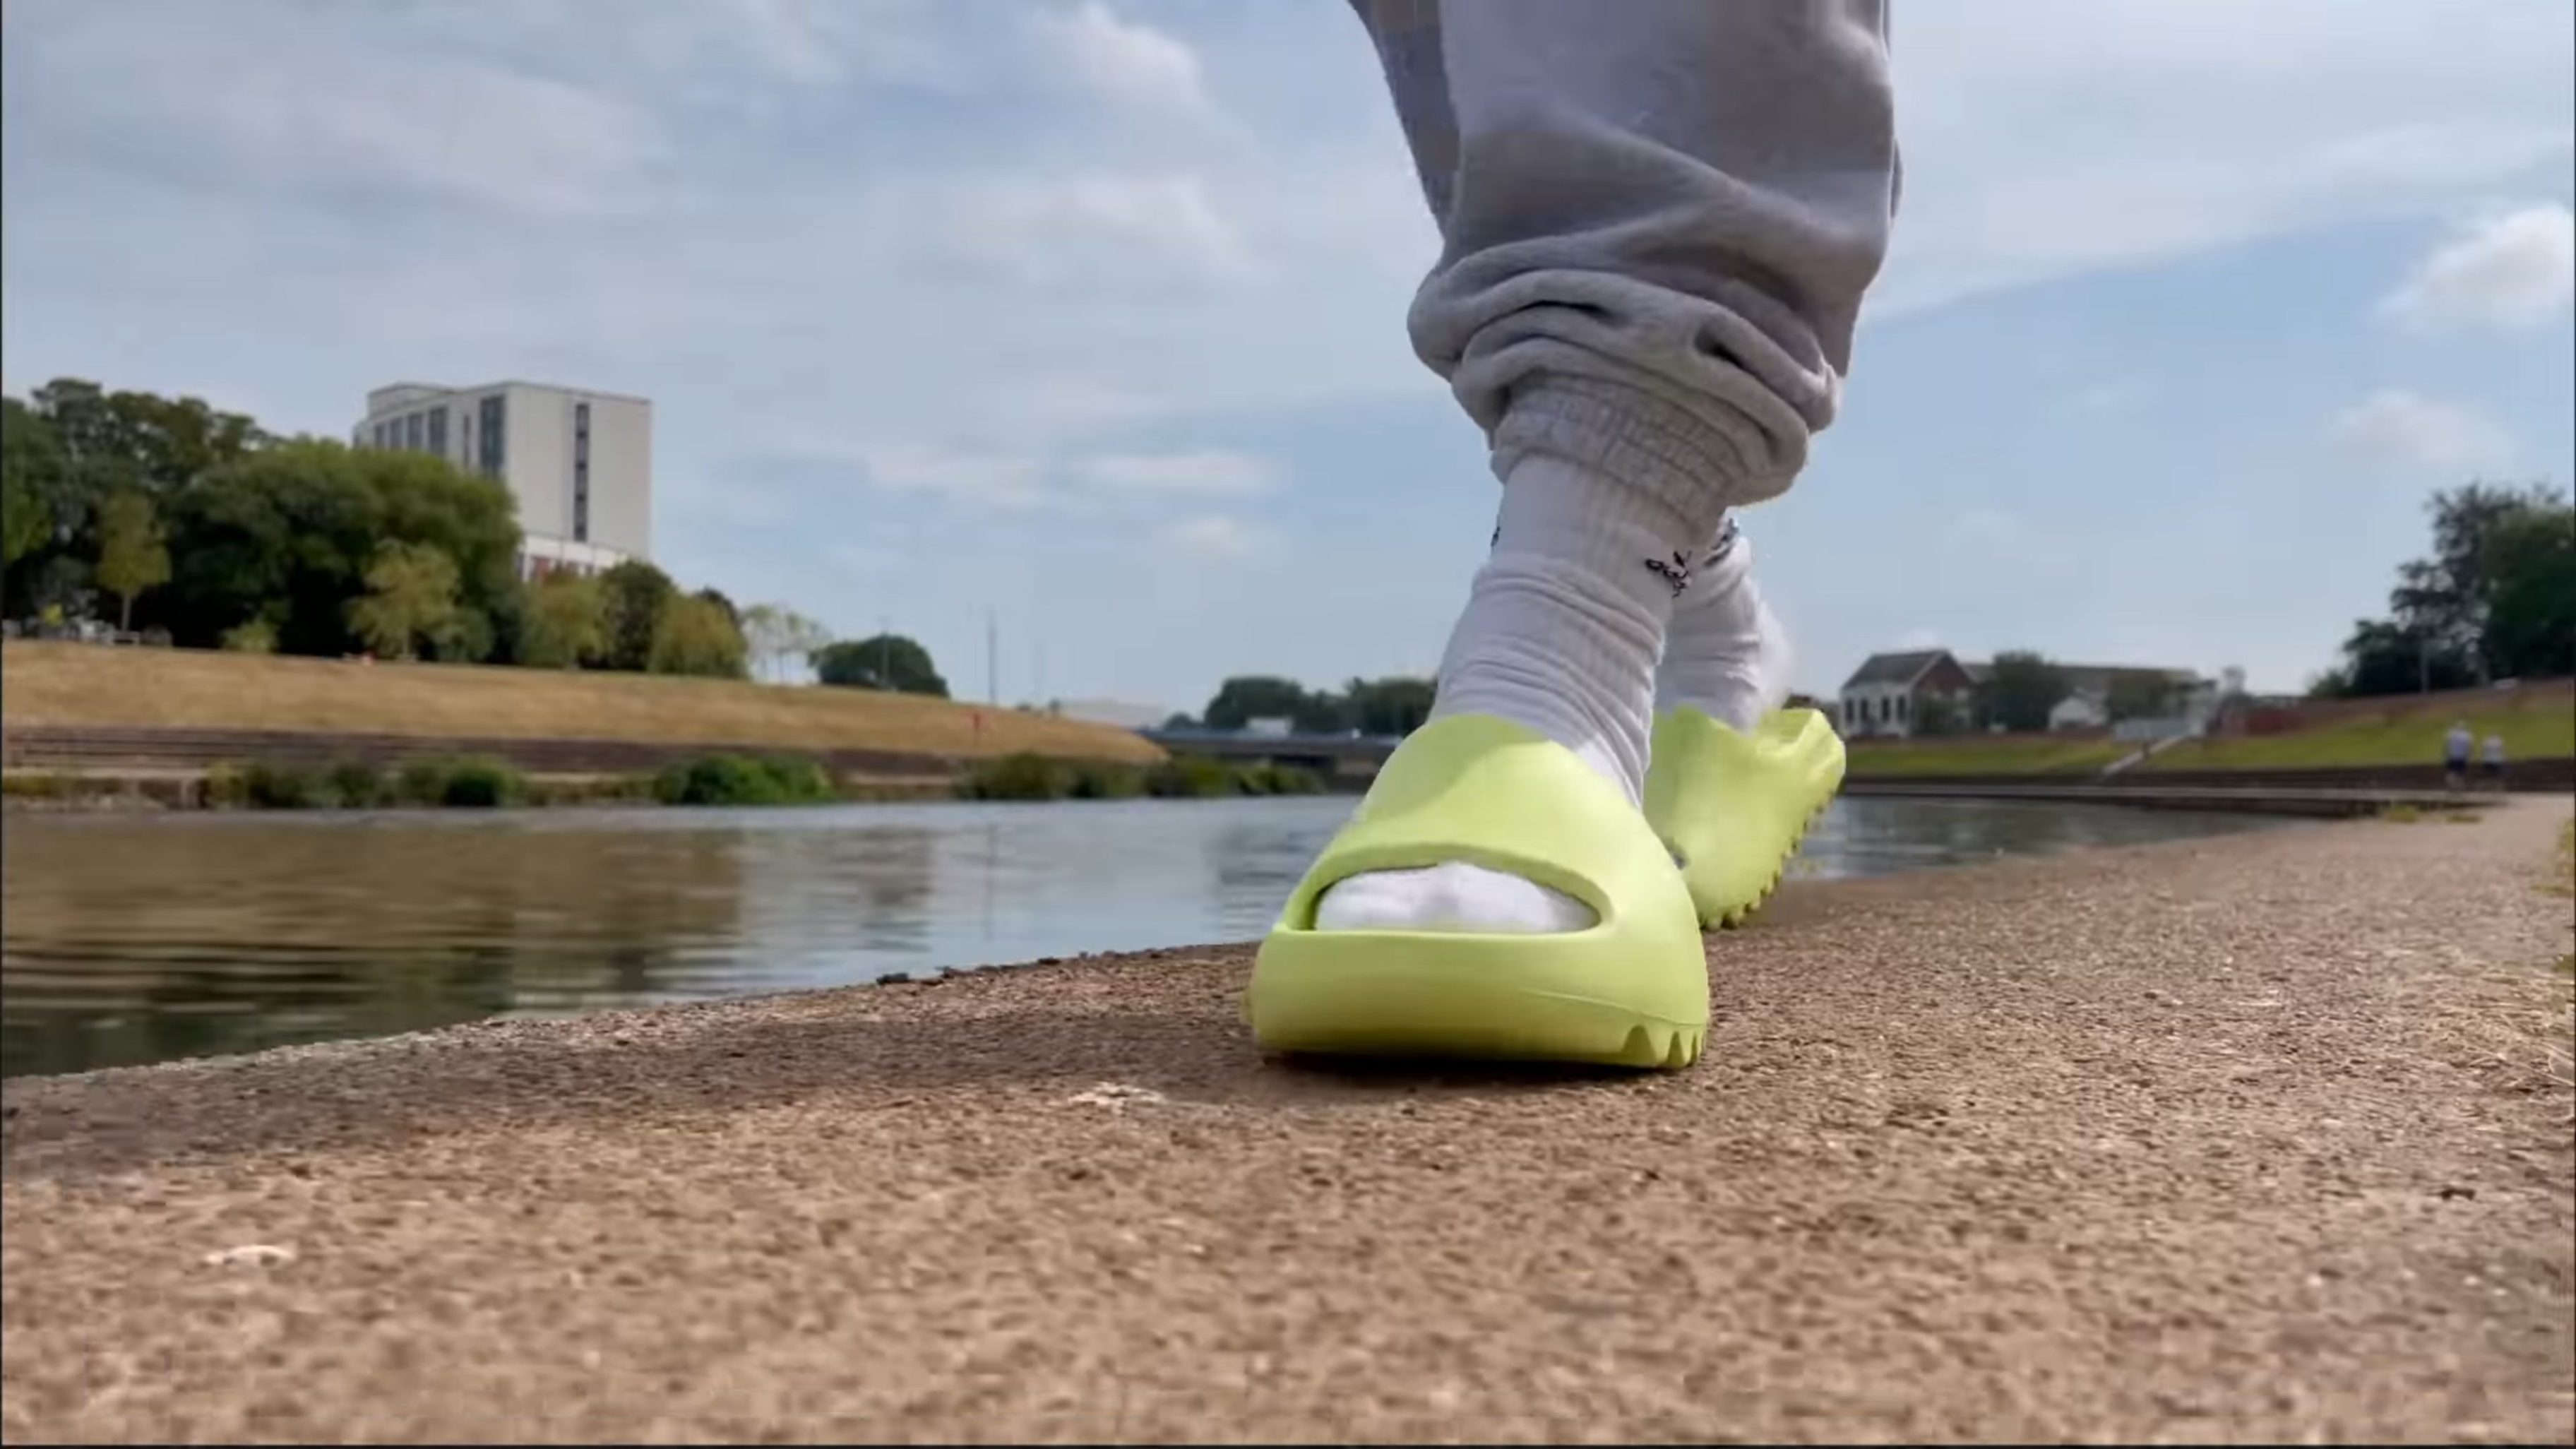 Yeezy Slides 2022 Walking on road with socks on